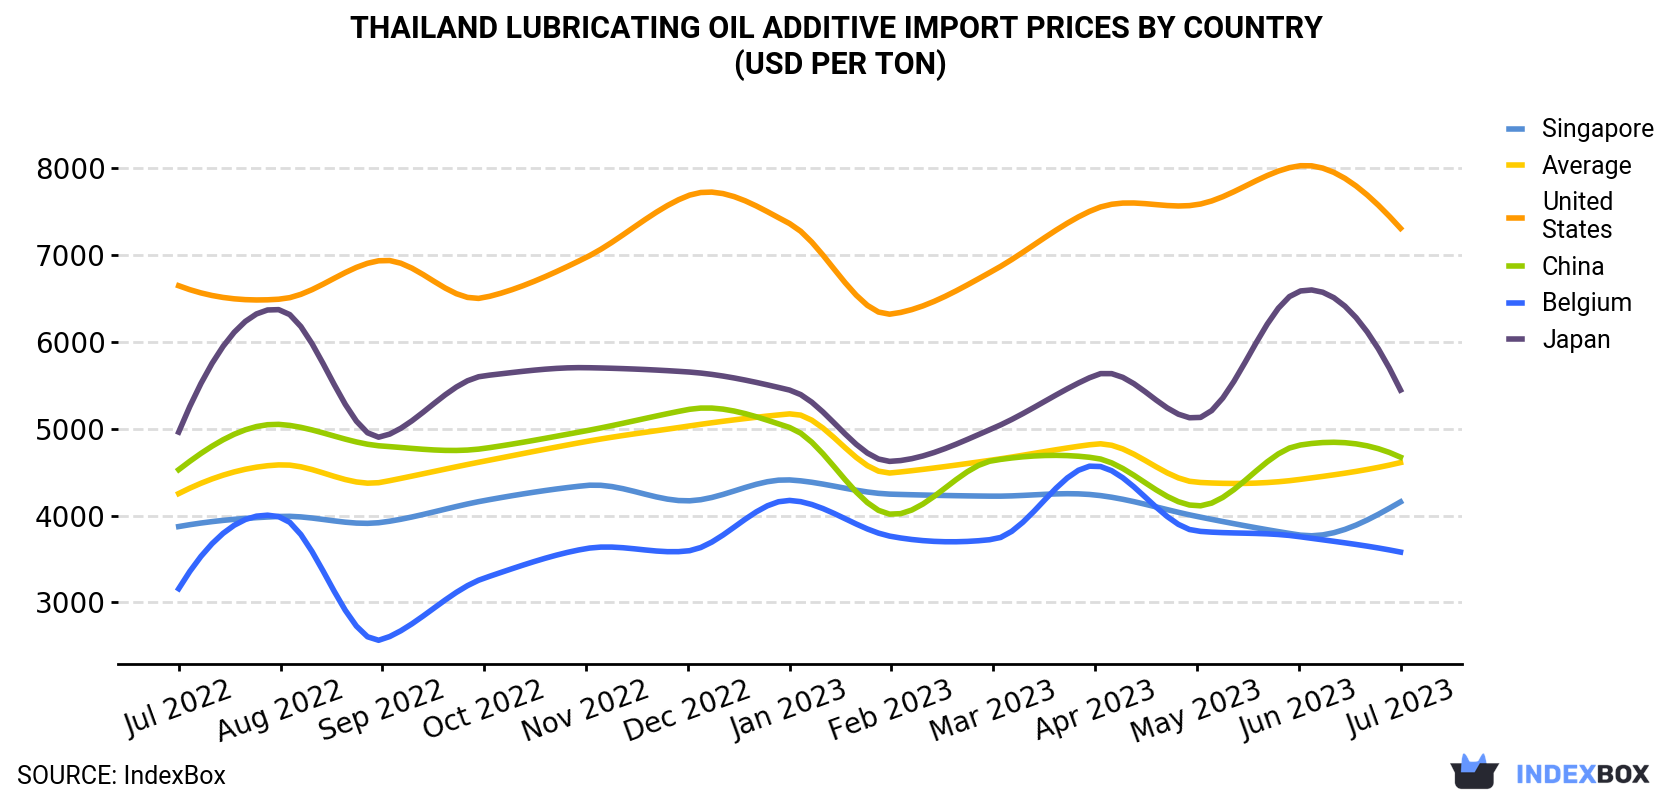 Thailand Lubricating Oil Additive Import Prices By Country (USD Per Ton)